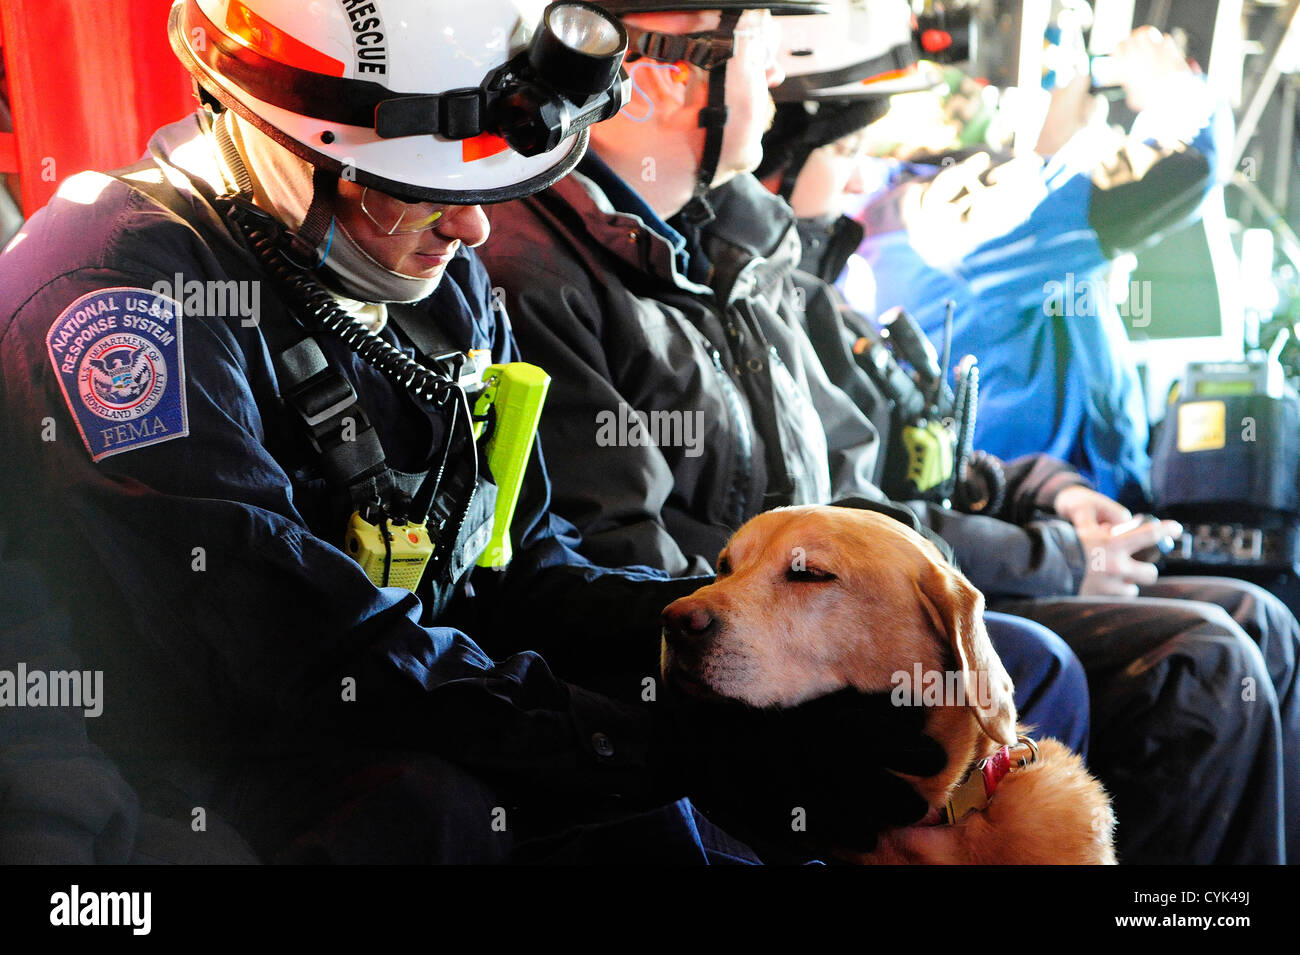 JOINT BASE MCGUIRE-DIX-LAKEHURST, N.J. – Dominic Dipietco, a specialist with the Maryland Urban Search and Rescue Task Force, pets search dog Jed aboard a U.S. Army CH-47 helicopter assigned to the Georgia Army National Guard on a flight from Joint Base M Stock Photo